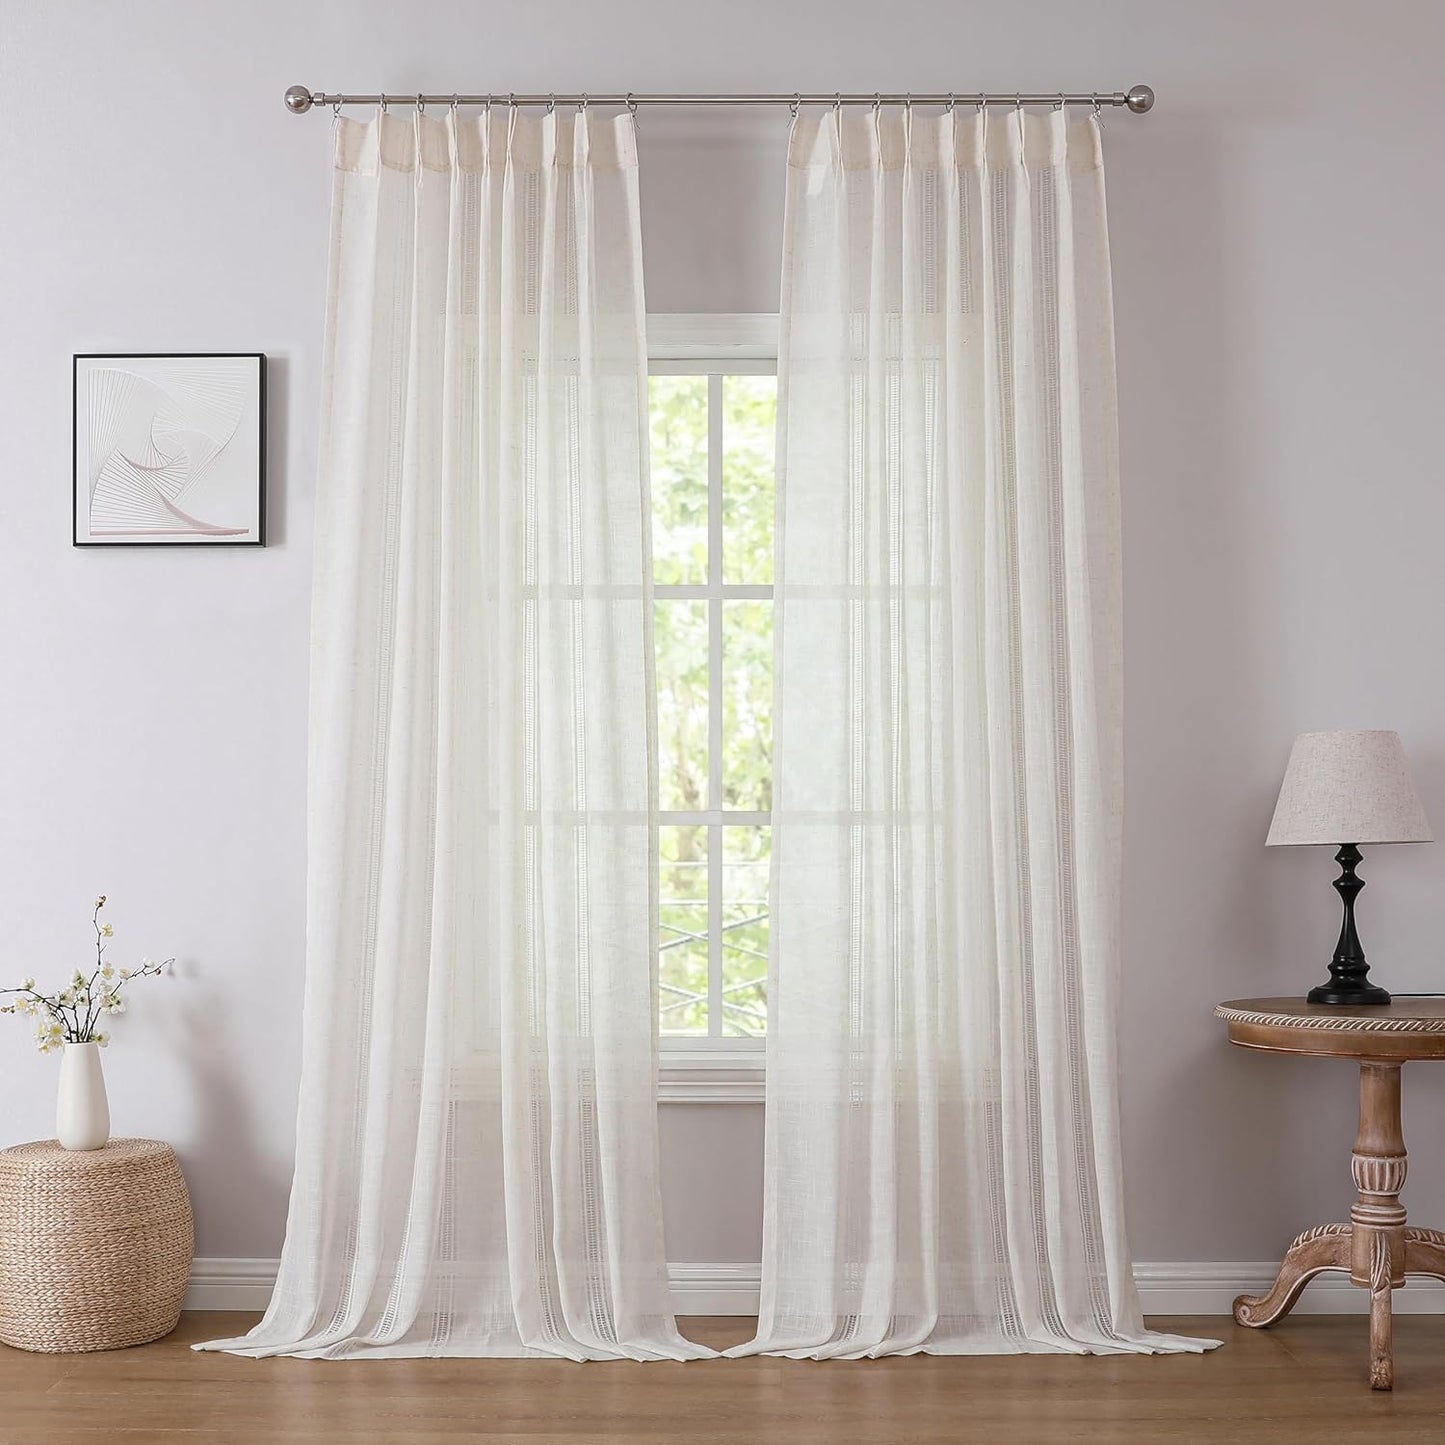 Kayne Studio Boho 2 Pages Sheer Pinch Pleated Curtains,Linen Blended 95 Inches Long Window Treatments,Light Filtering Pinch Pleat Drapes for Farmhouse Living Room 36" W X 90" L,18 Hooks,Beige  Kayne Studio Natural 36"X95"X2 